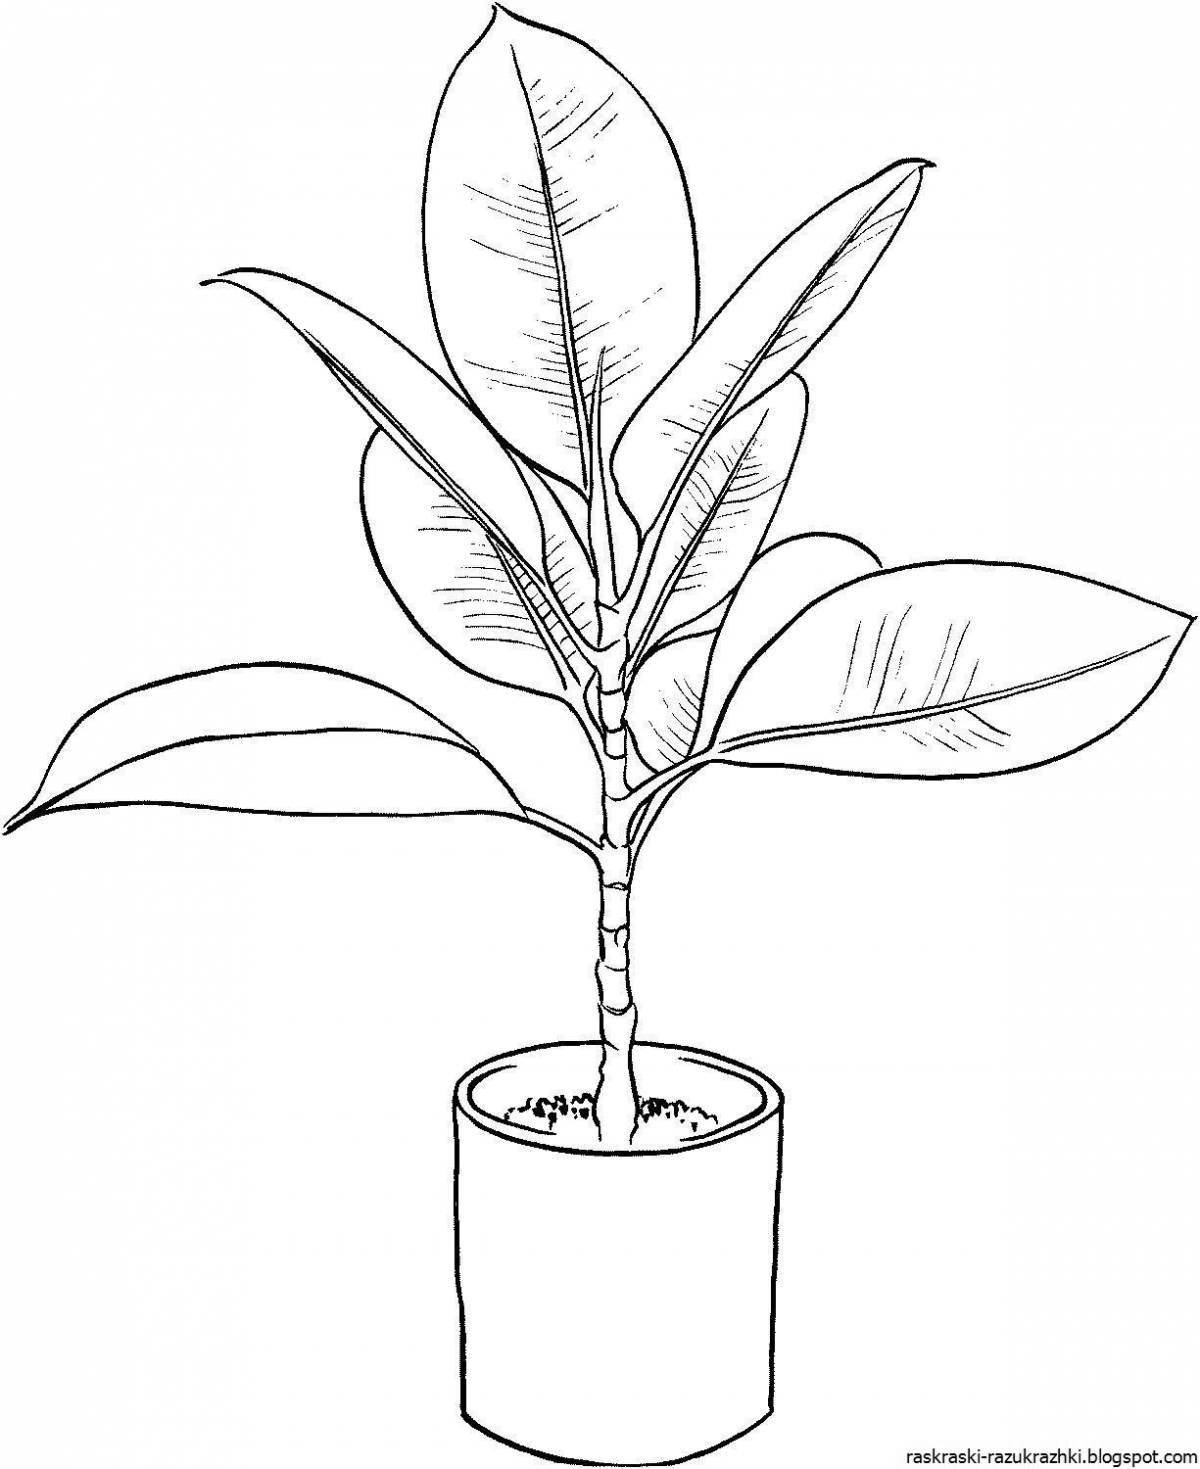 Coloring book radiant ficus for the little ones